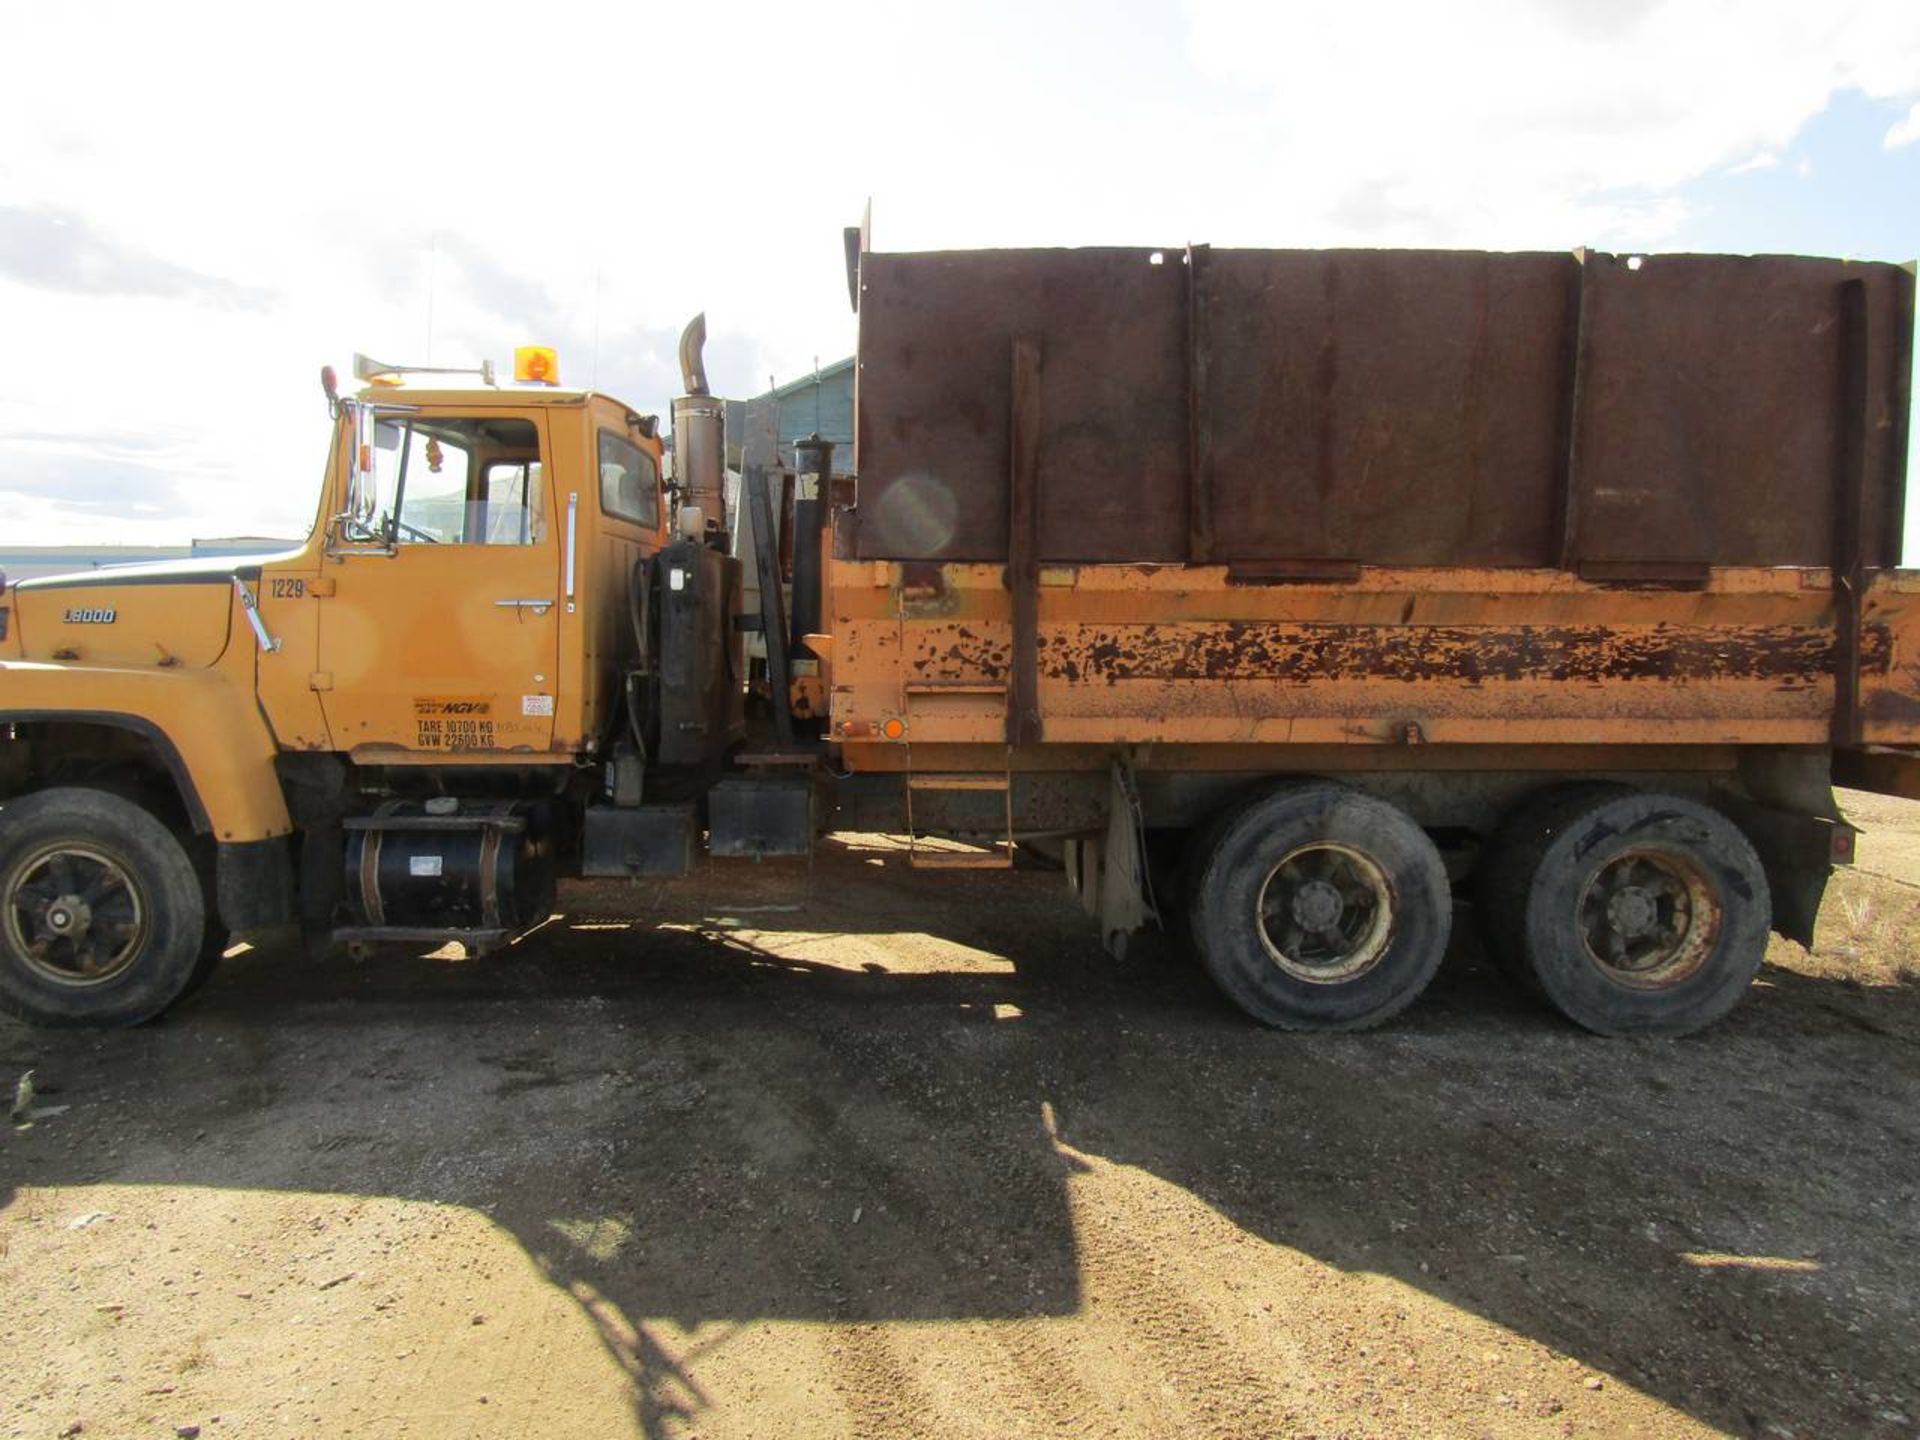 1990 Ford L9000 Dump Truck - Image 4 of 5